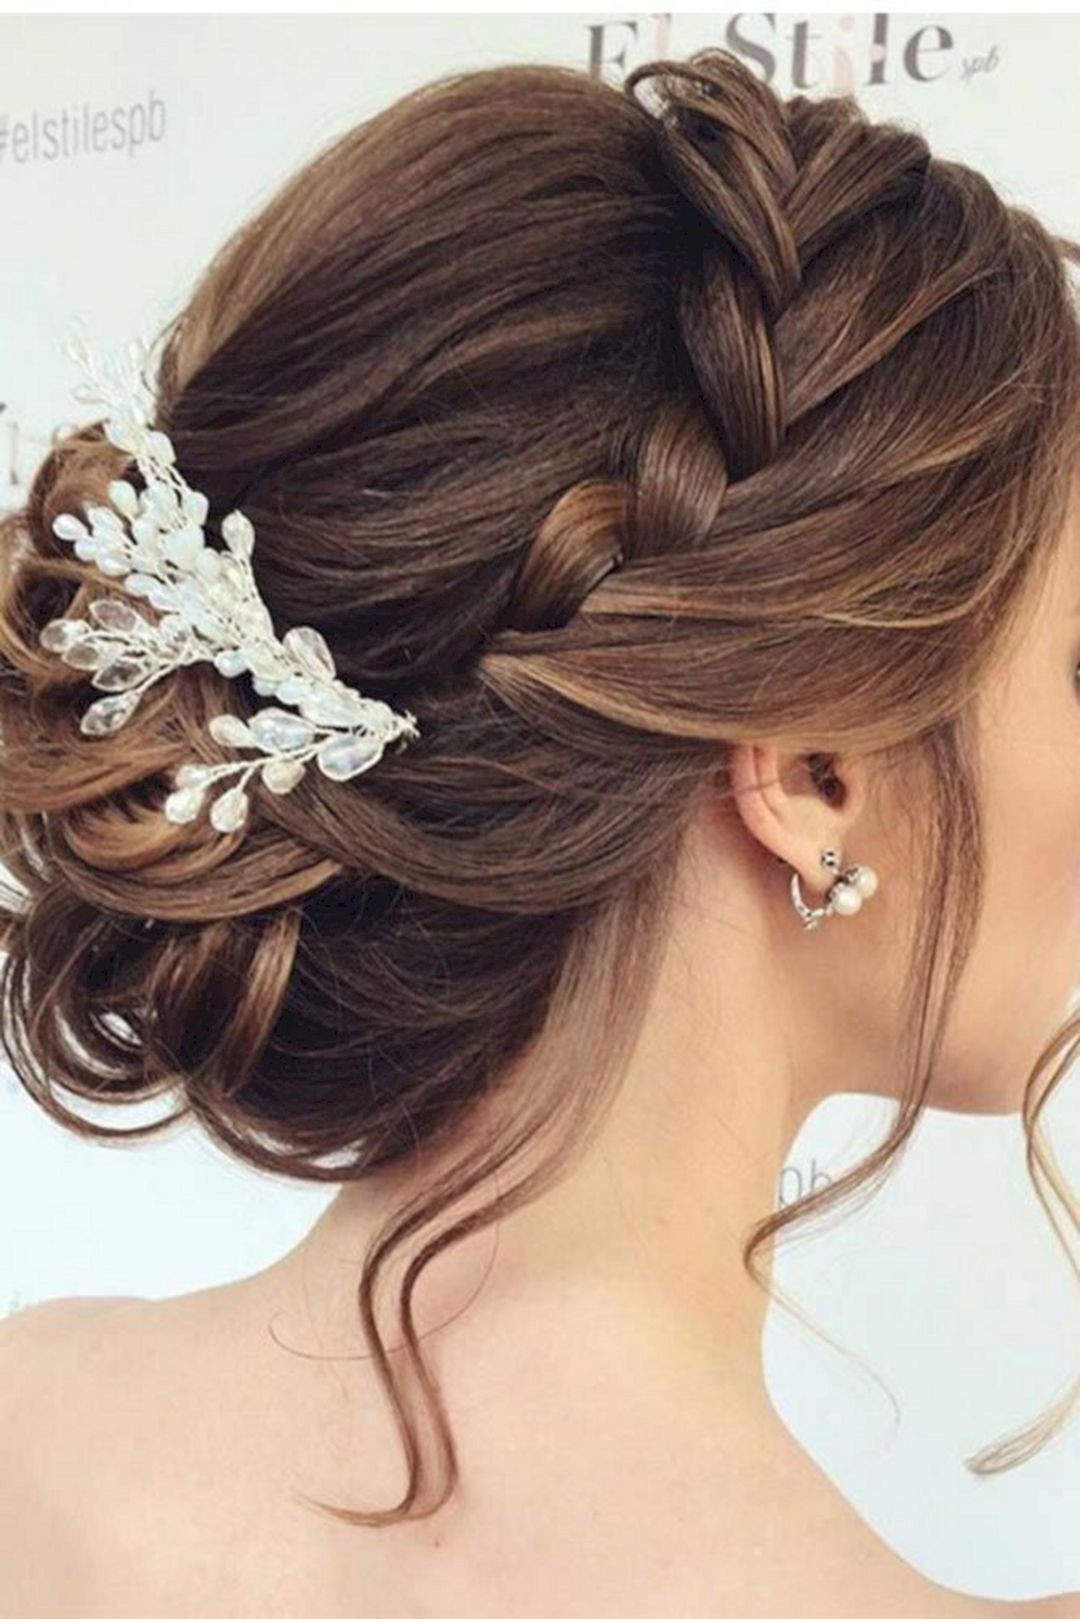 Updos Hairstyles For Bridesmaids
 Bridesmaid Updo Hairstyles Long Hair – OOSILE